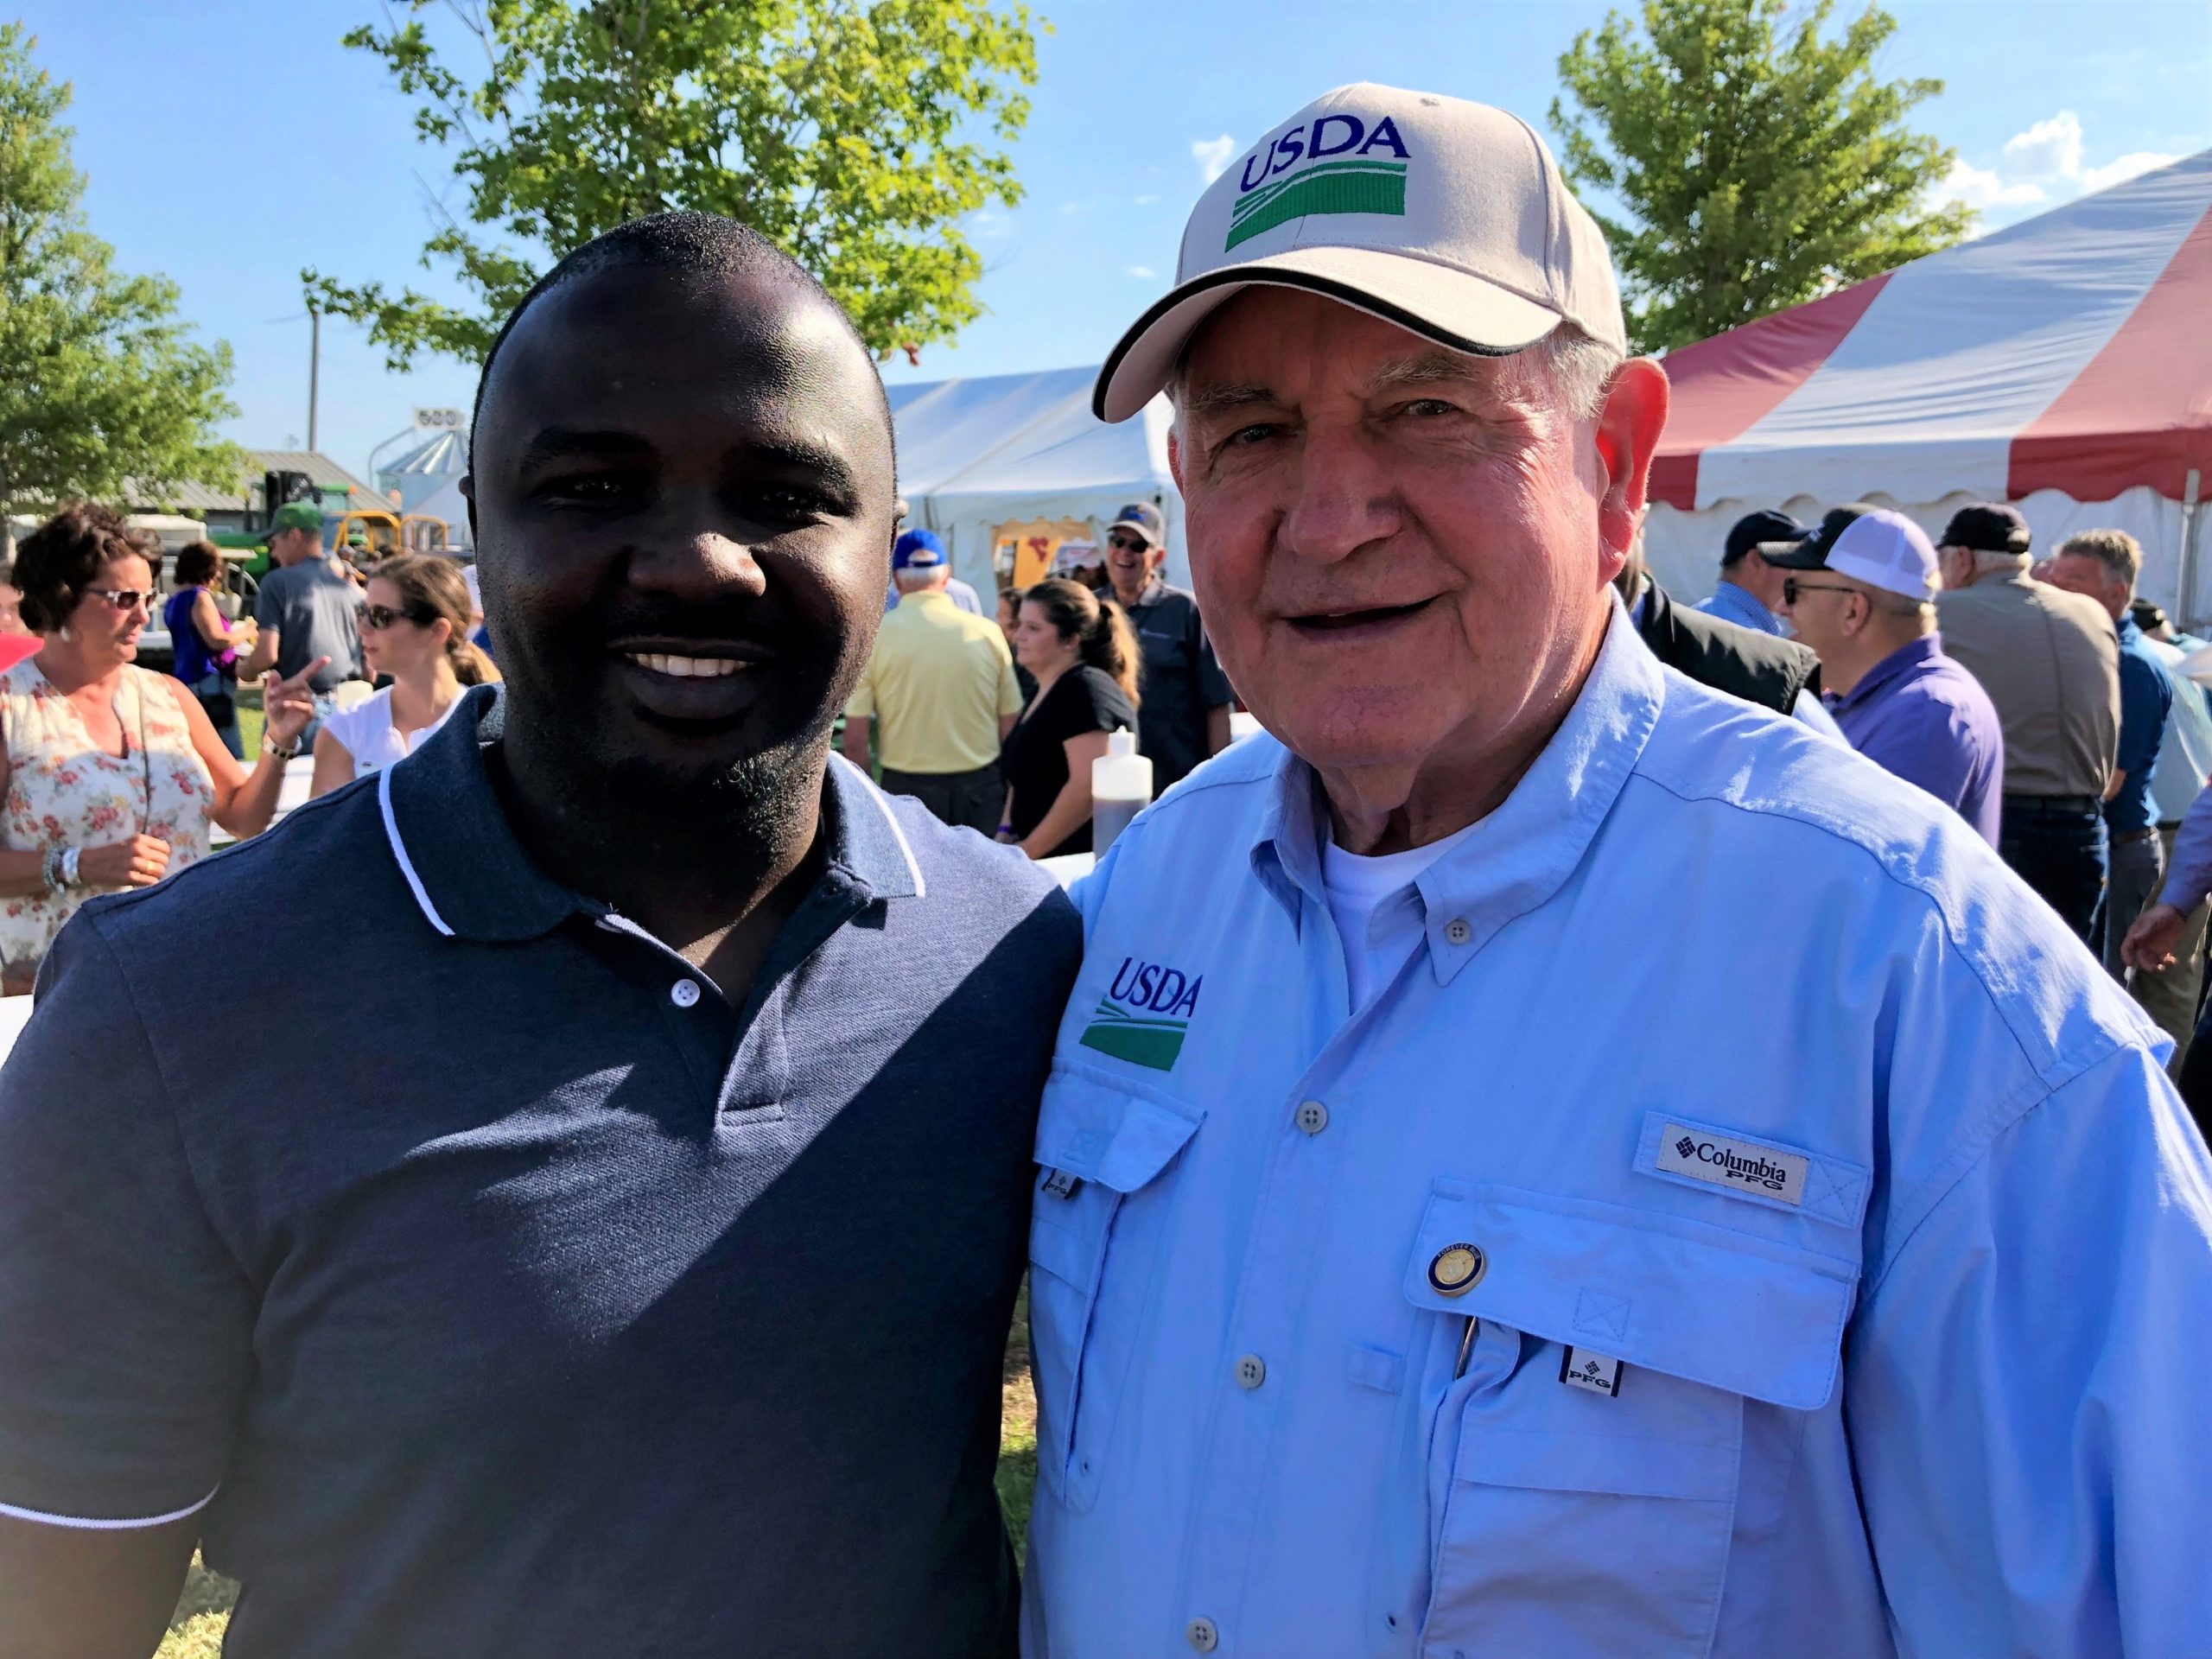 2019 Fellow Laurent Shilingi had the opportunity to meet Secretary of Agriculture Sonny Perdue at FarmFest in rural Minnesota.